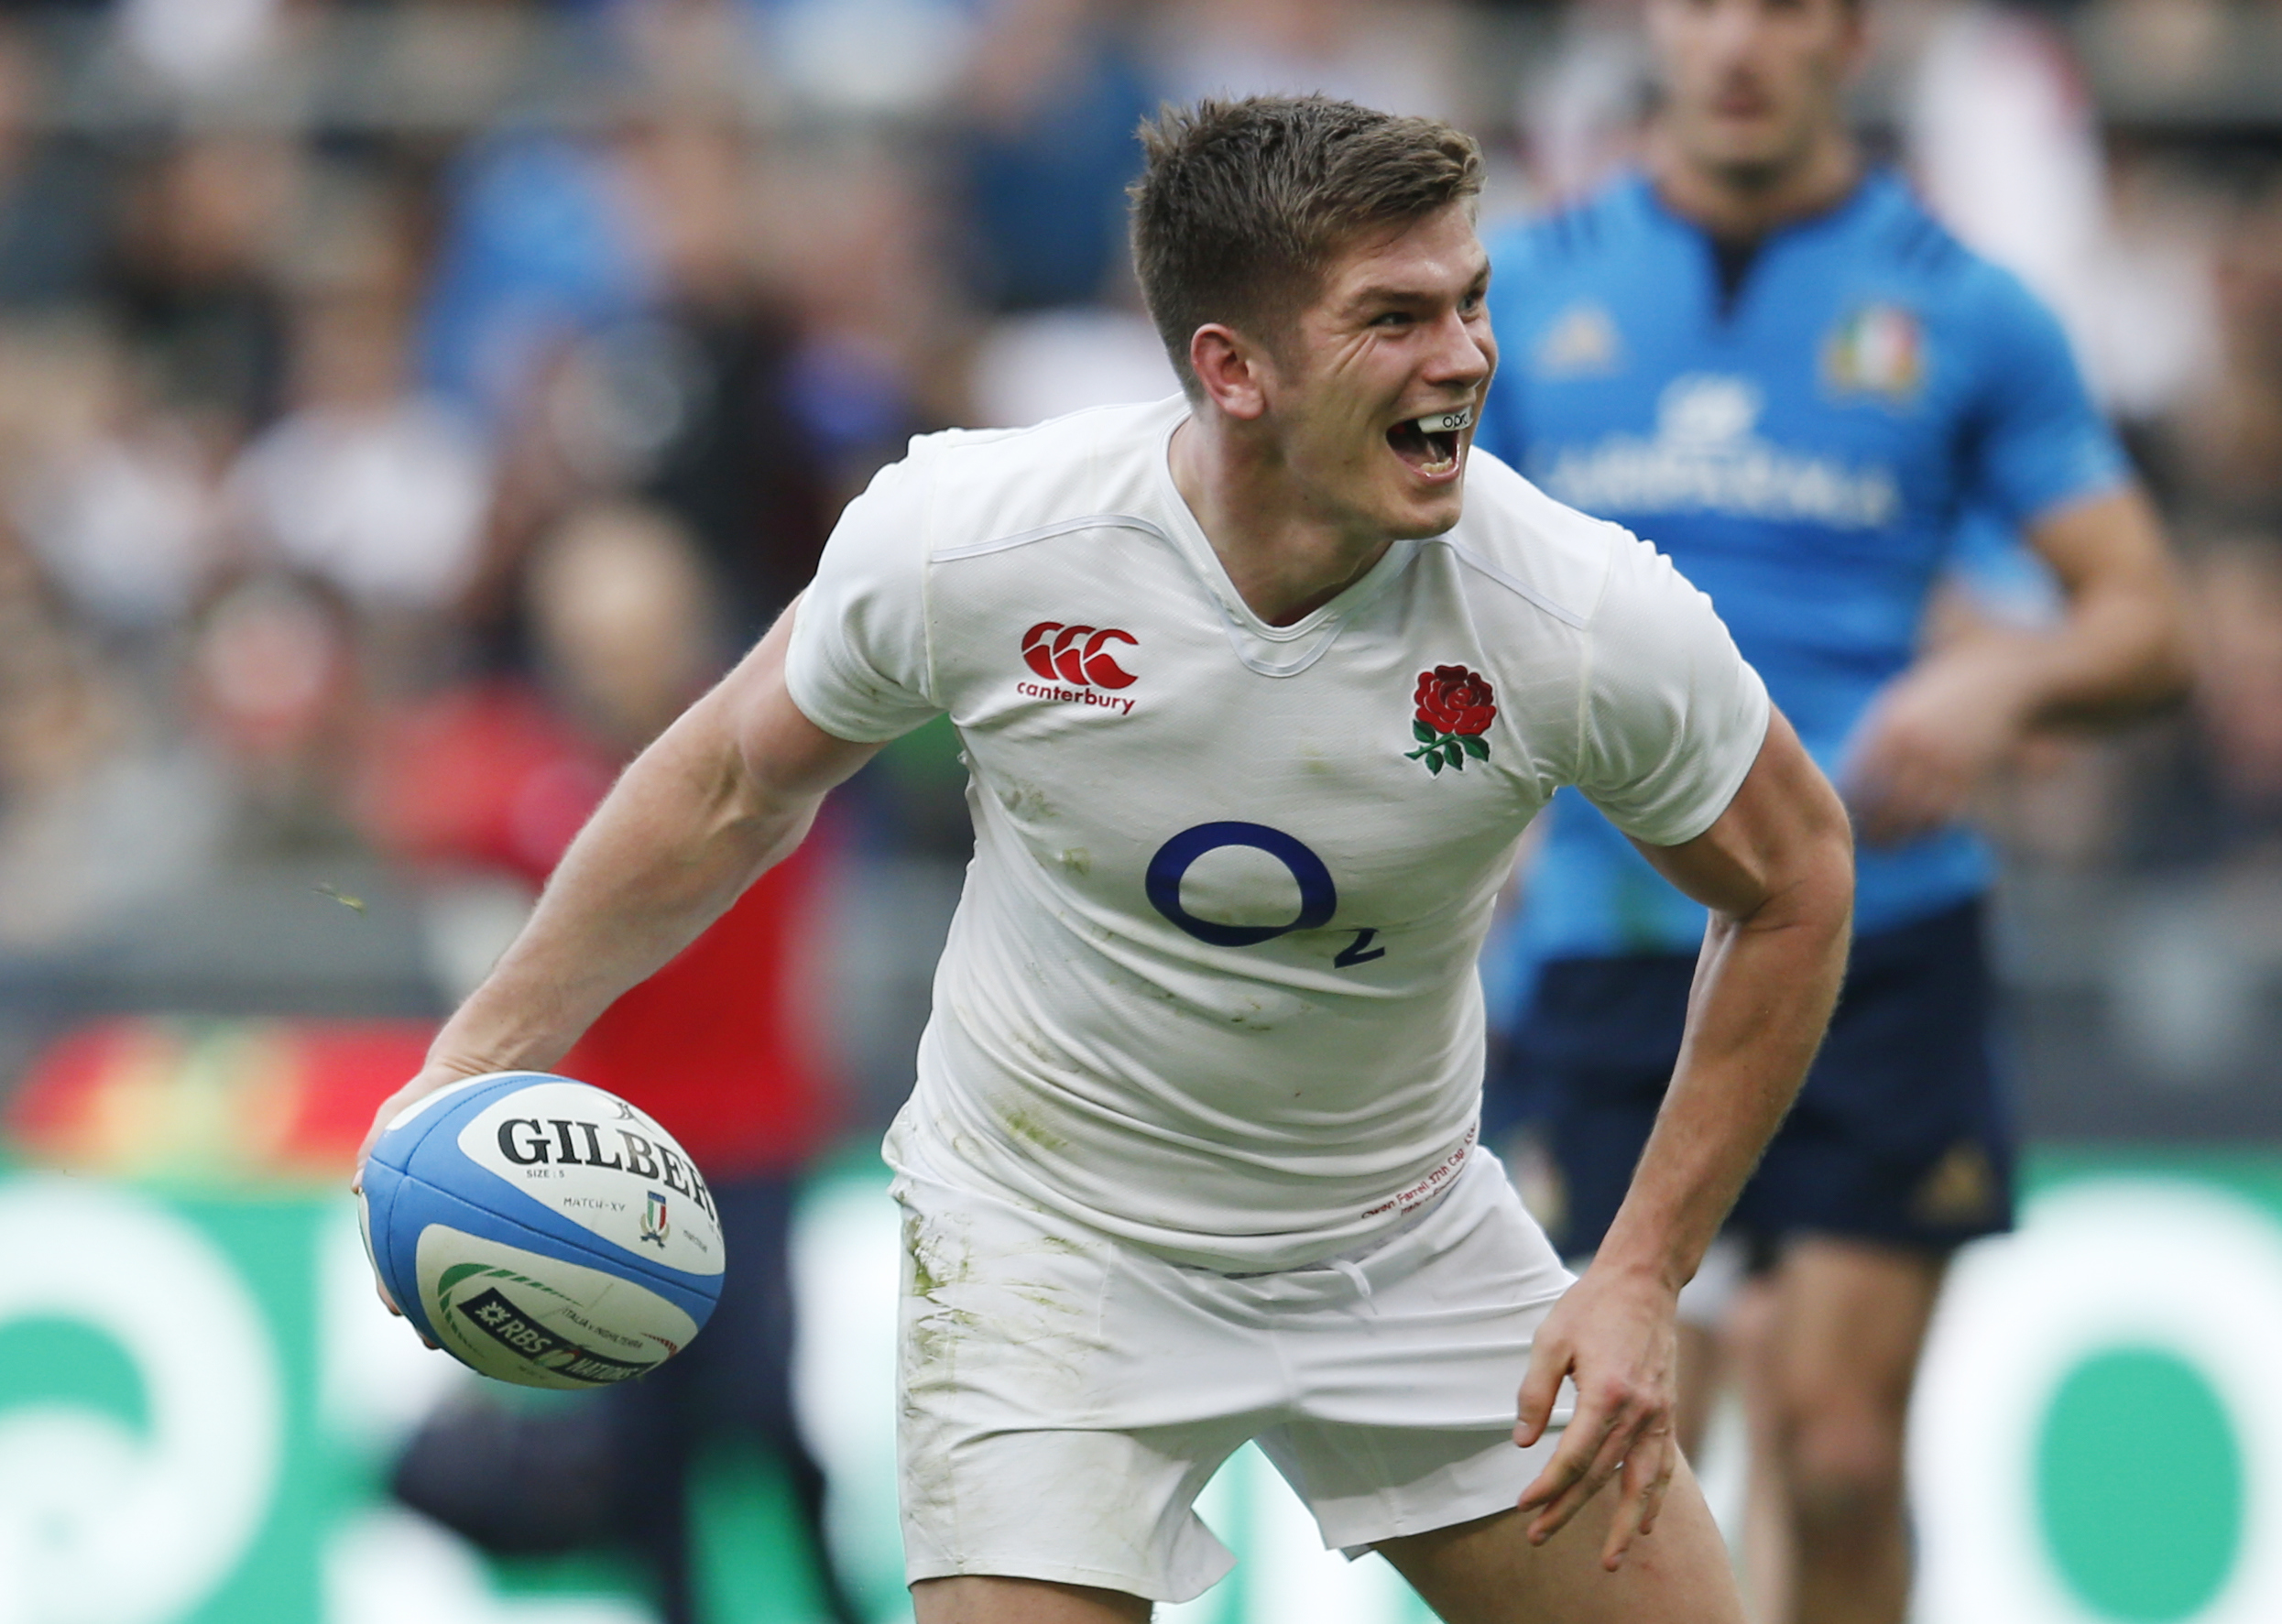 Owen Farrell celebrates after scoring the fifth try for England in their 40-9 Six Nations rout of Italy in Rome. Photo: Reuters